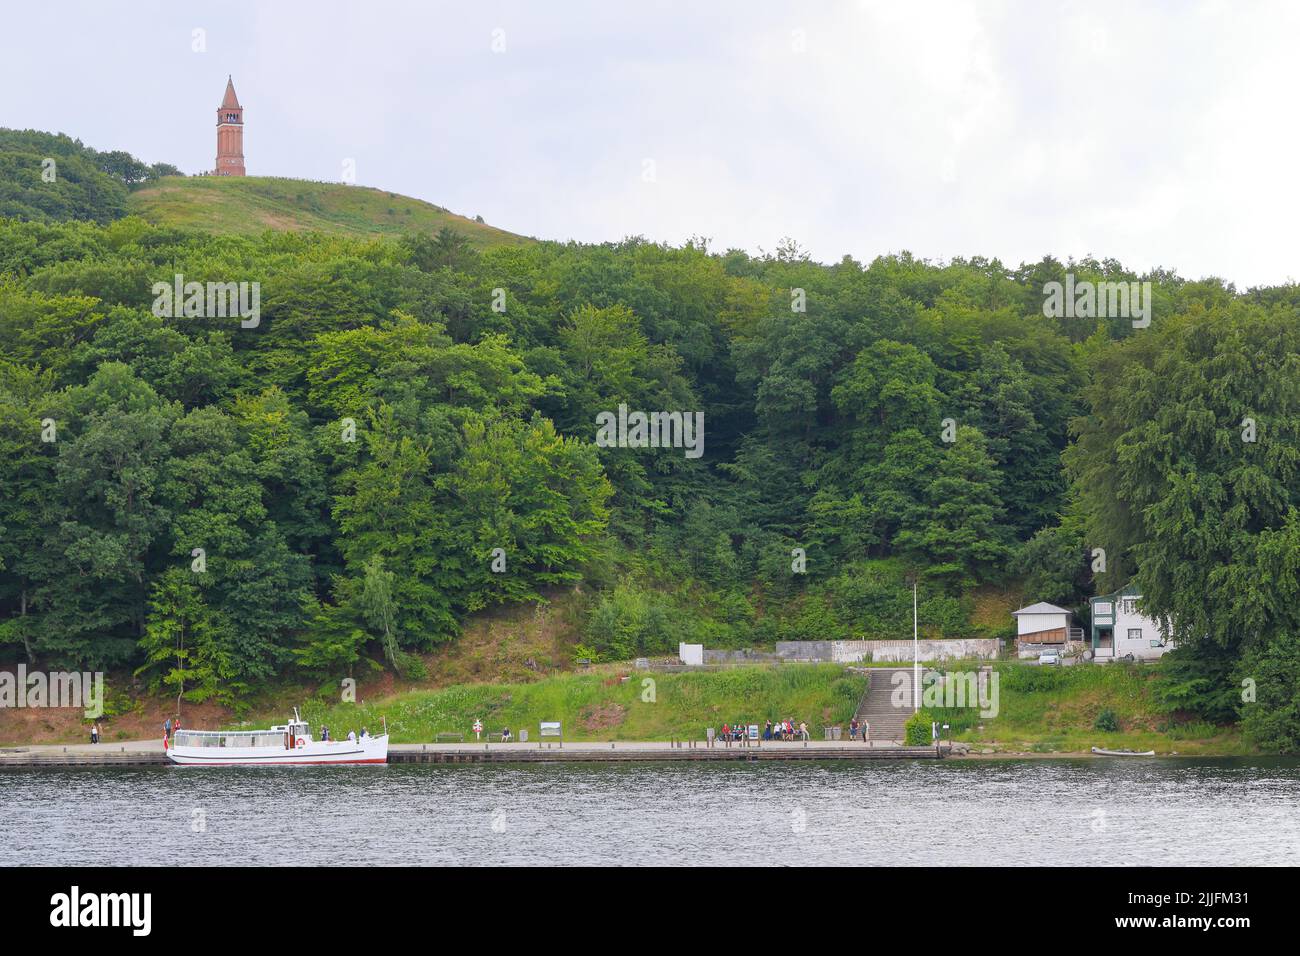 Himmelbjerget,, the hill that was once believed to be the tallest point in Denmark as seen from Julsø with Hotel Julsø in the foreground in 2022. Stock Photo